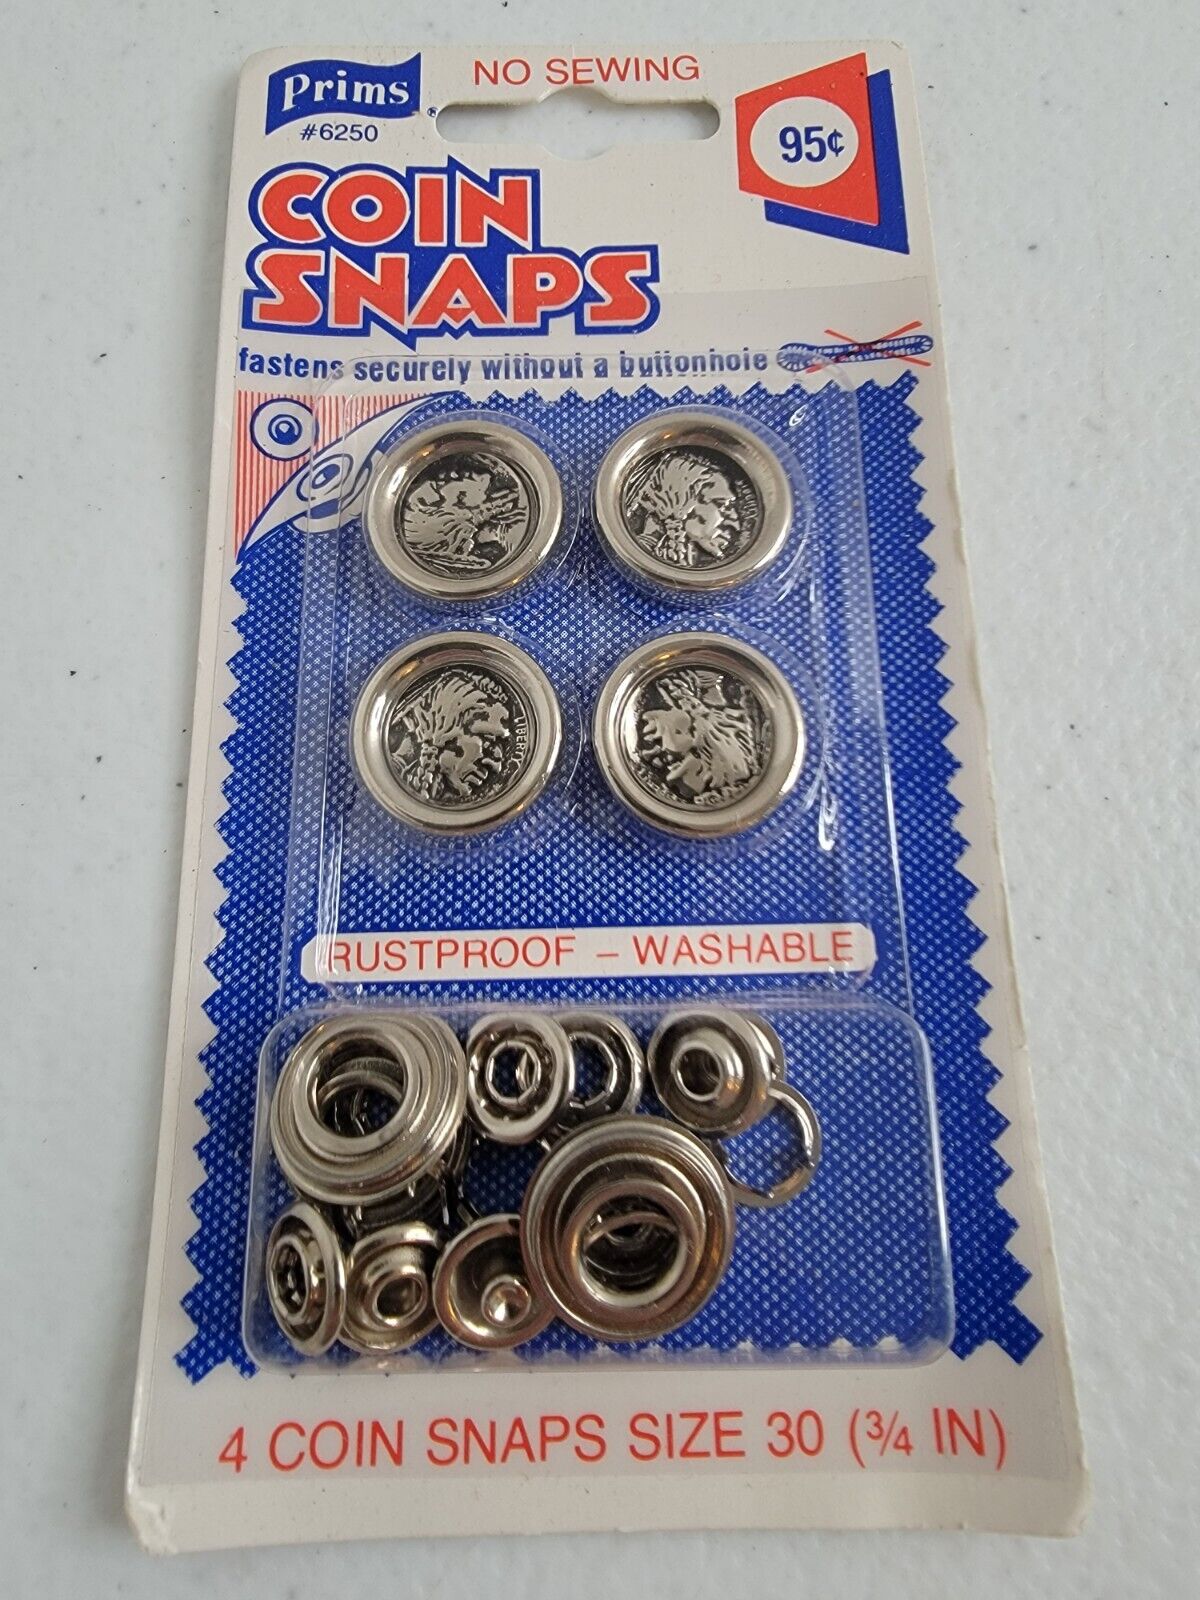 Prims #6250 Coin Snaps Fasteners American Indian Themed 4-Pack Vintage Sewing